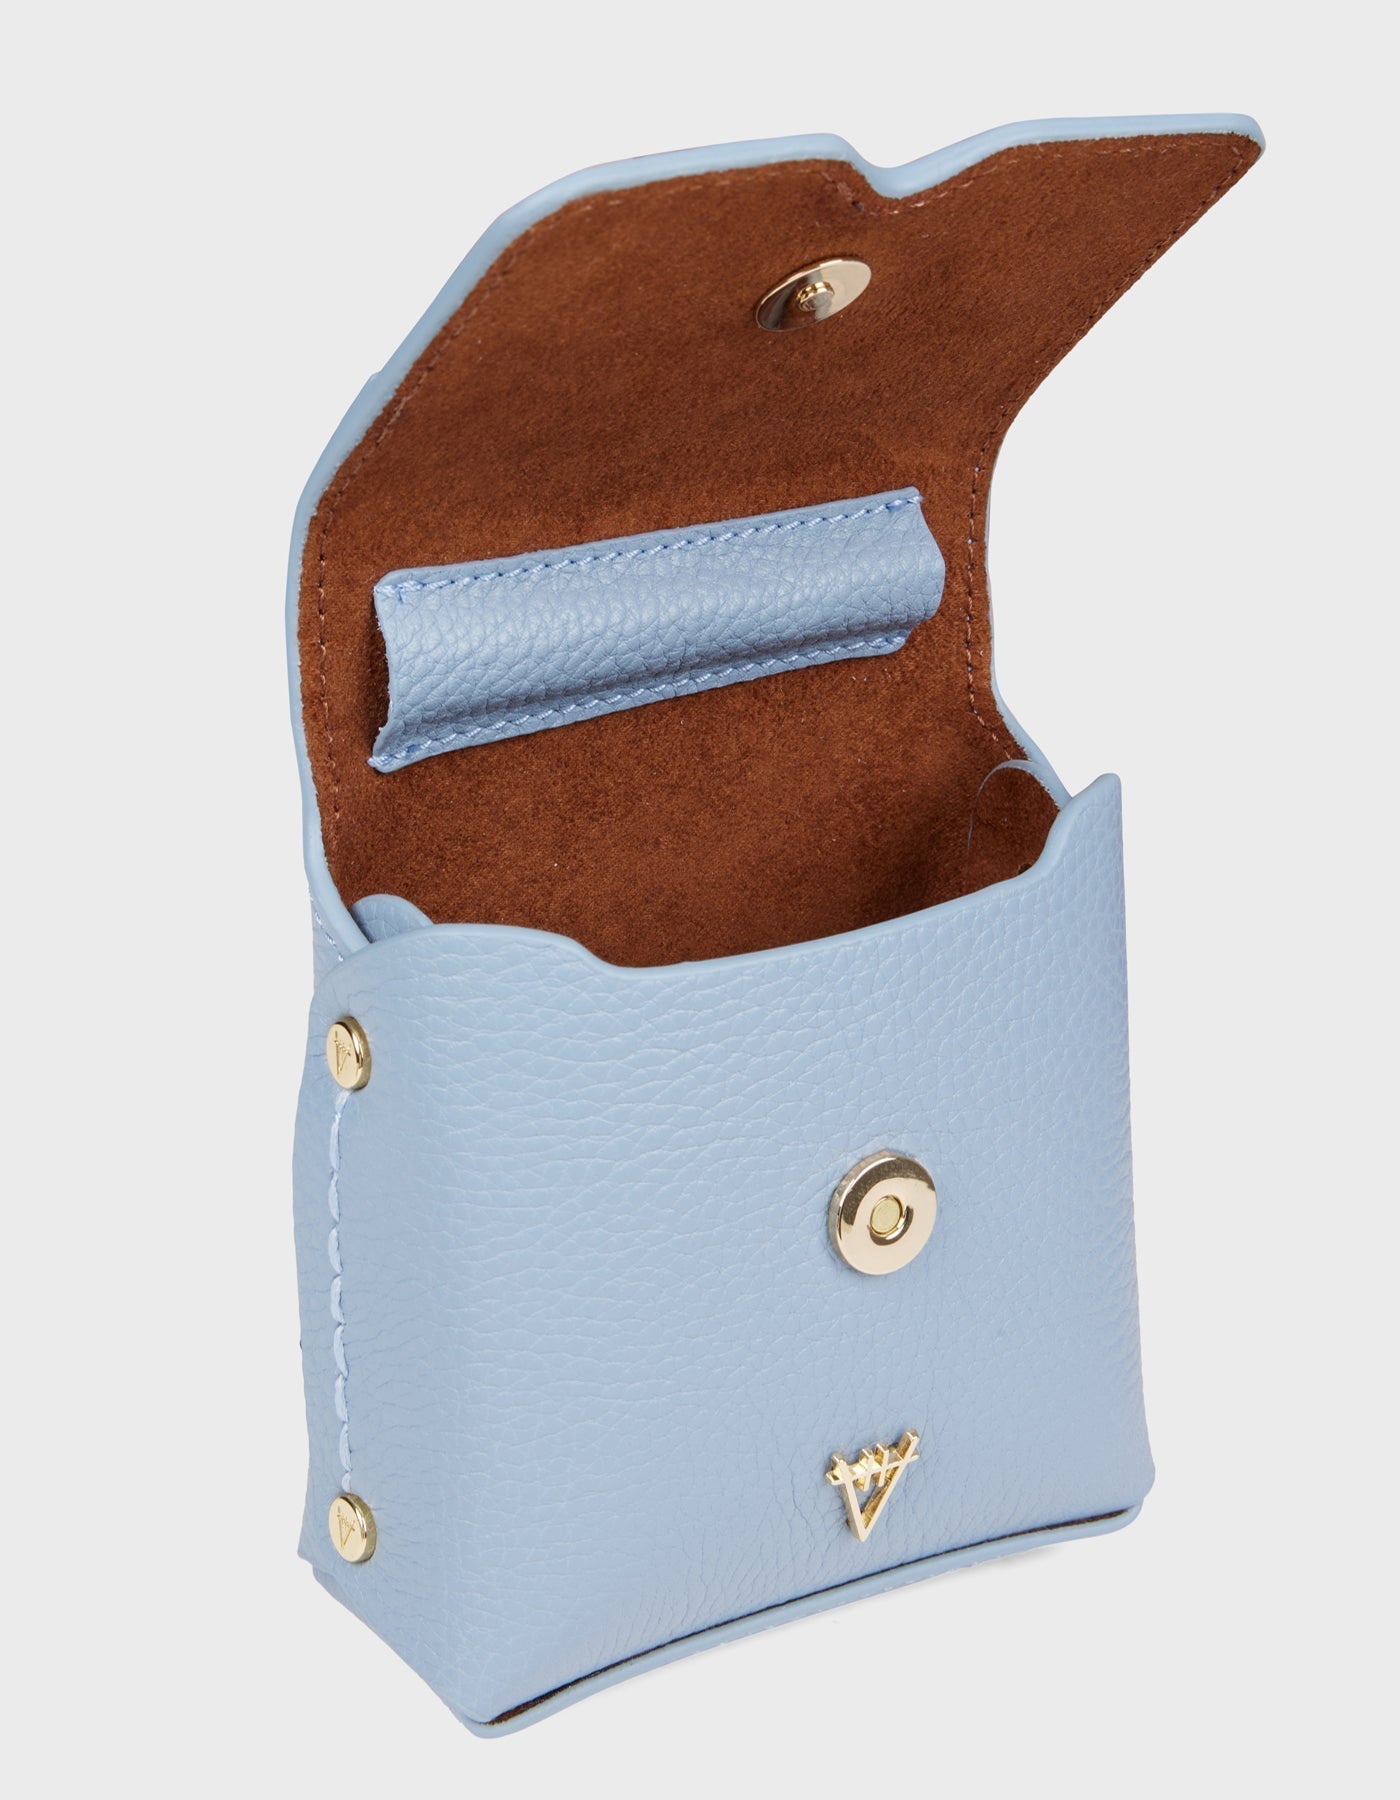 Baby Mare - Finest Quality HiVa Atelier GmbH Leather Accessories